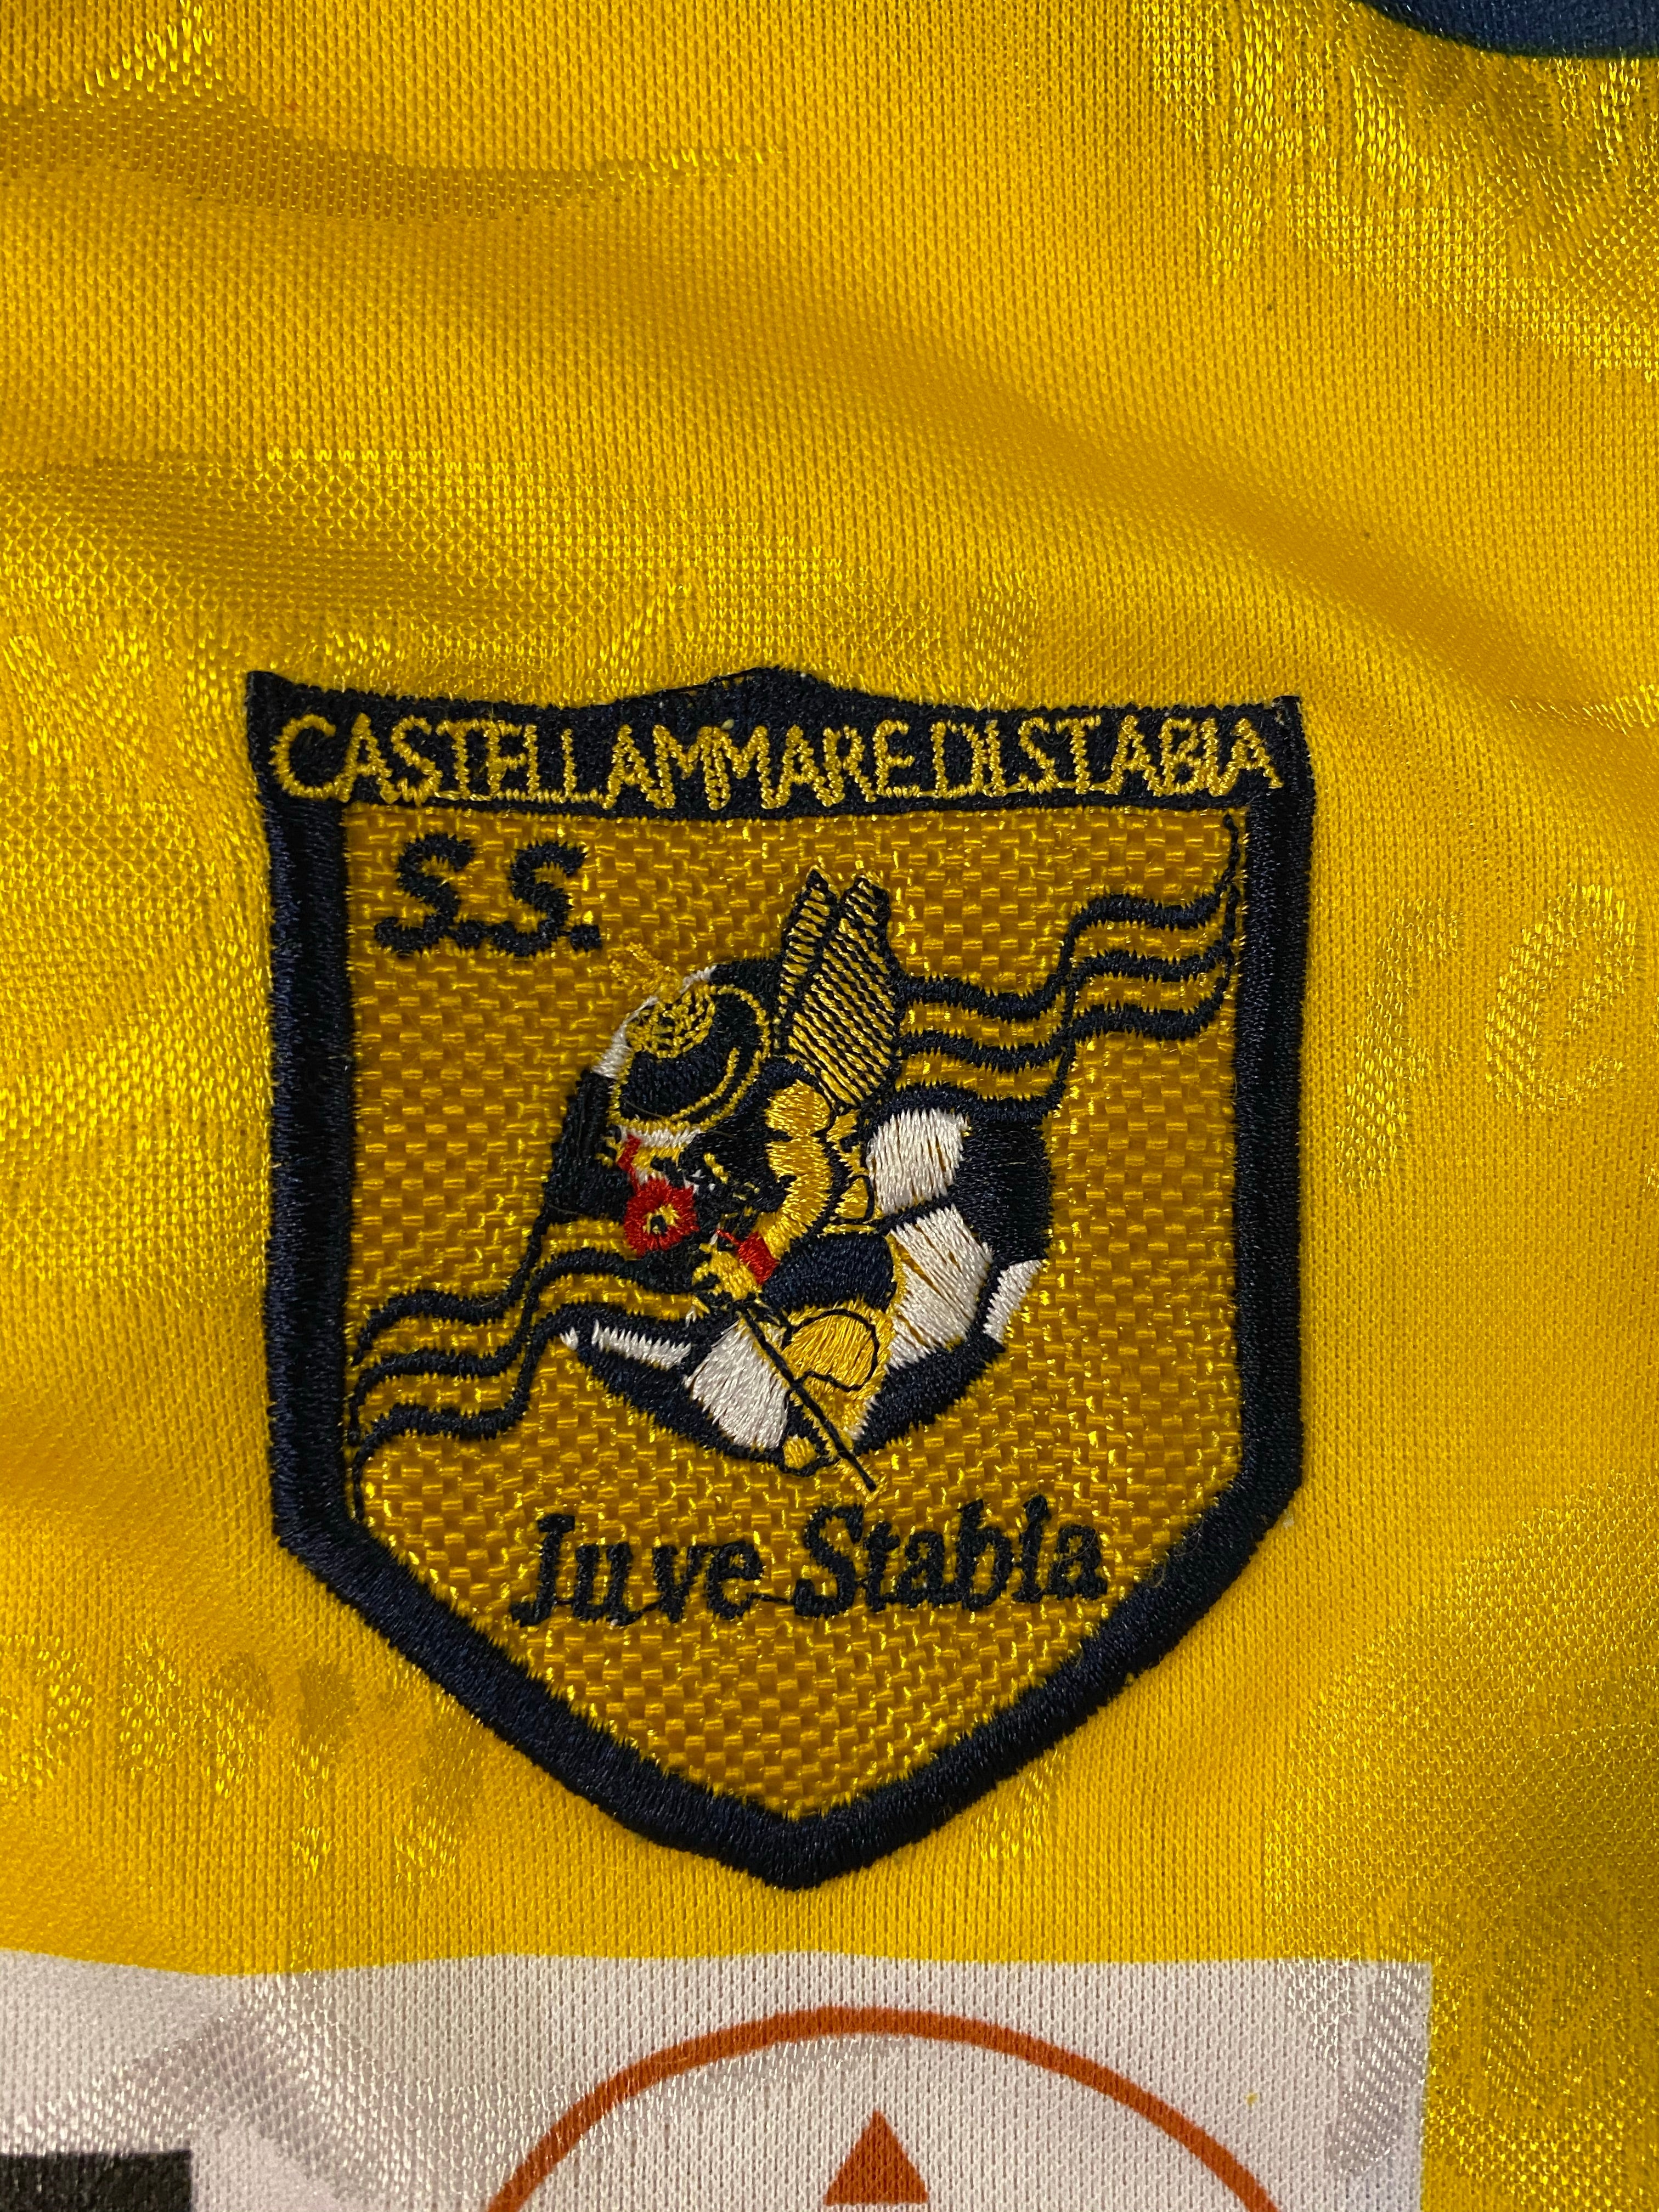 2003/04 Juve Stabia *Match Issue* Home Shirt #6 (XL) 9/10